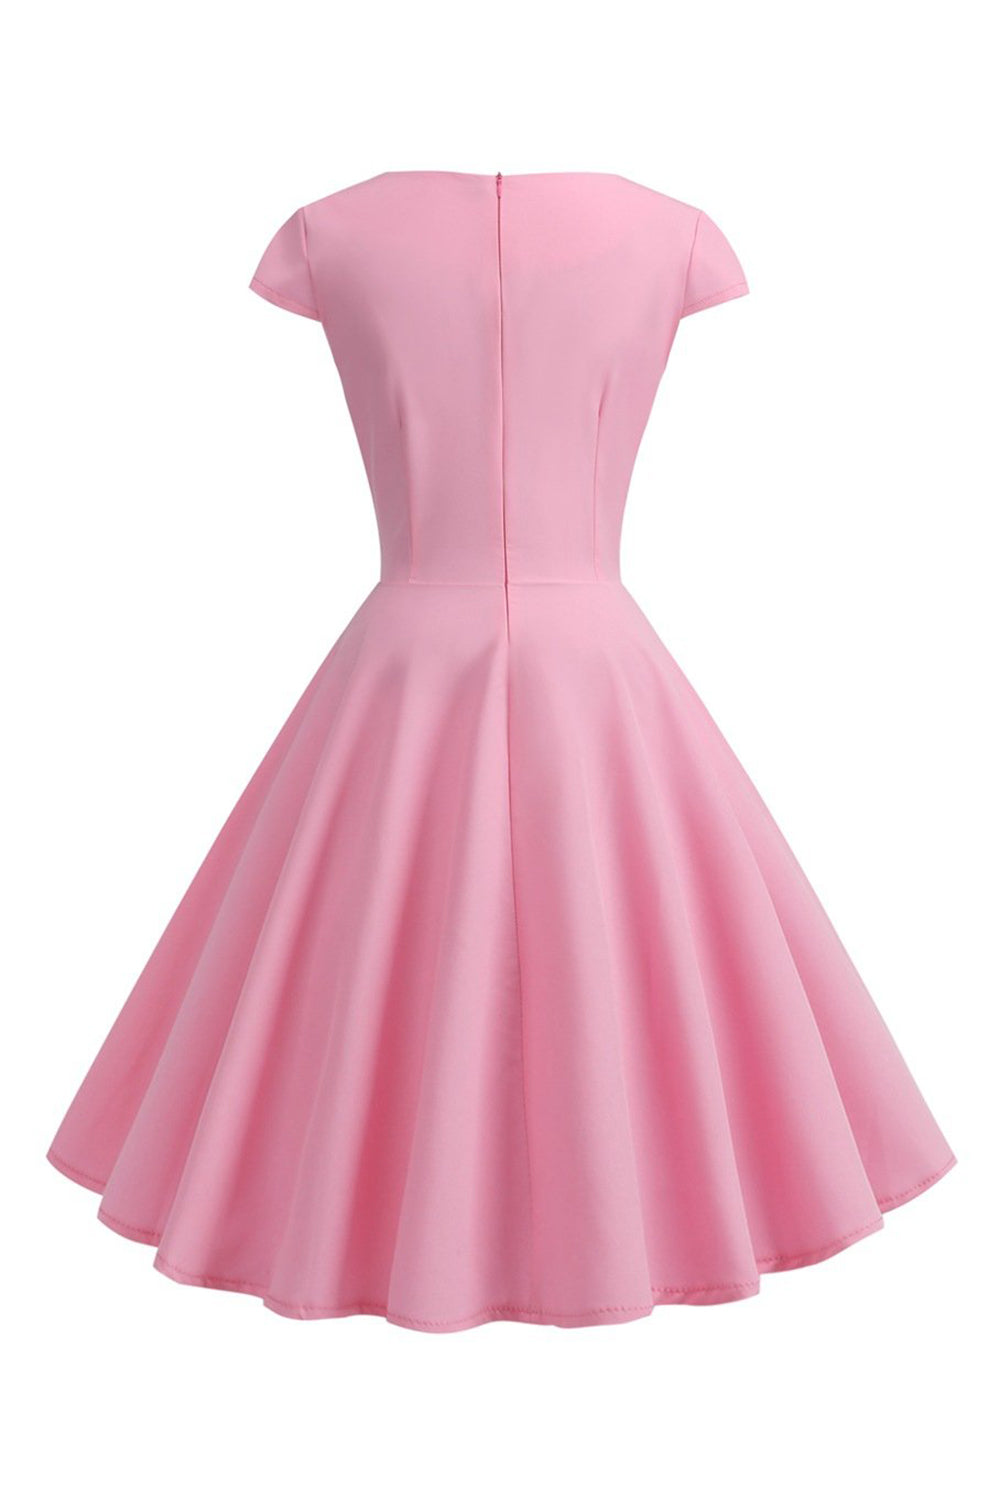 Pink Cap Sleeves A Line 1950s Dress